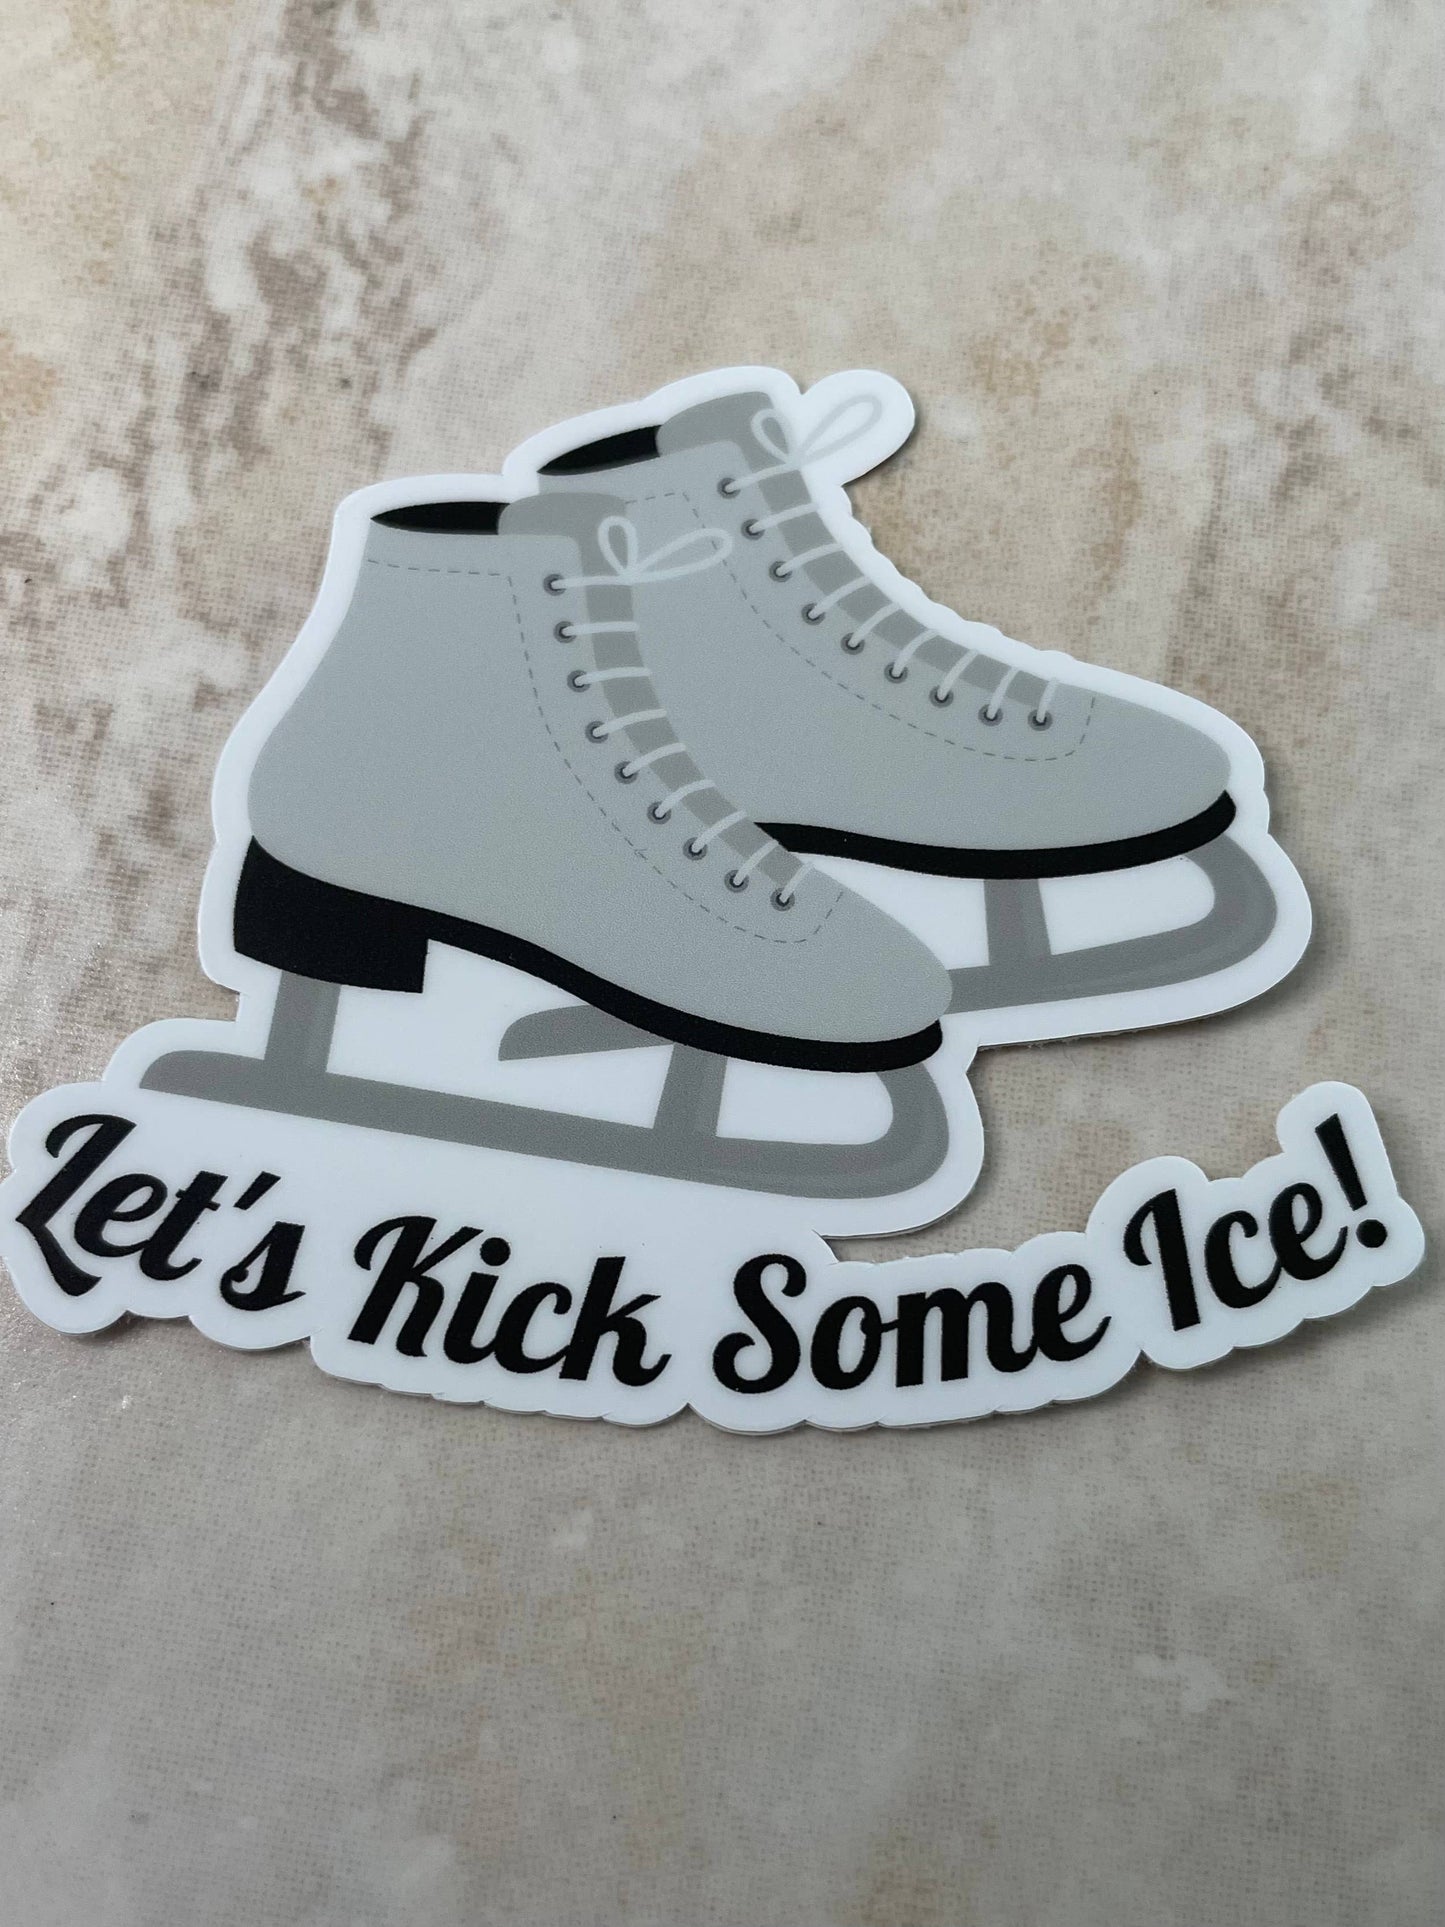 Let's Kick Some Ice Figure Skating Sticker, 3" x 2.5"